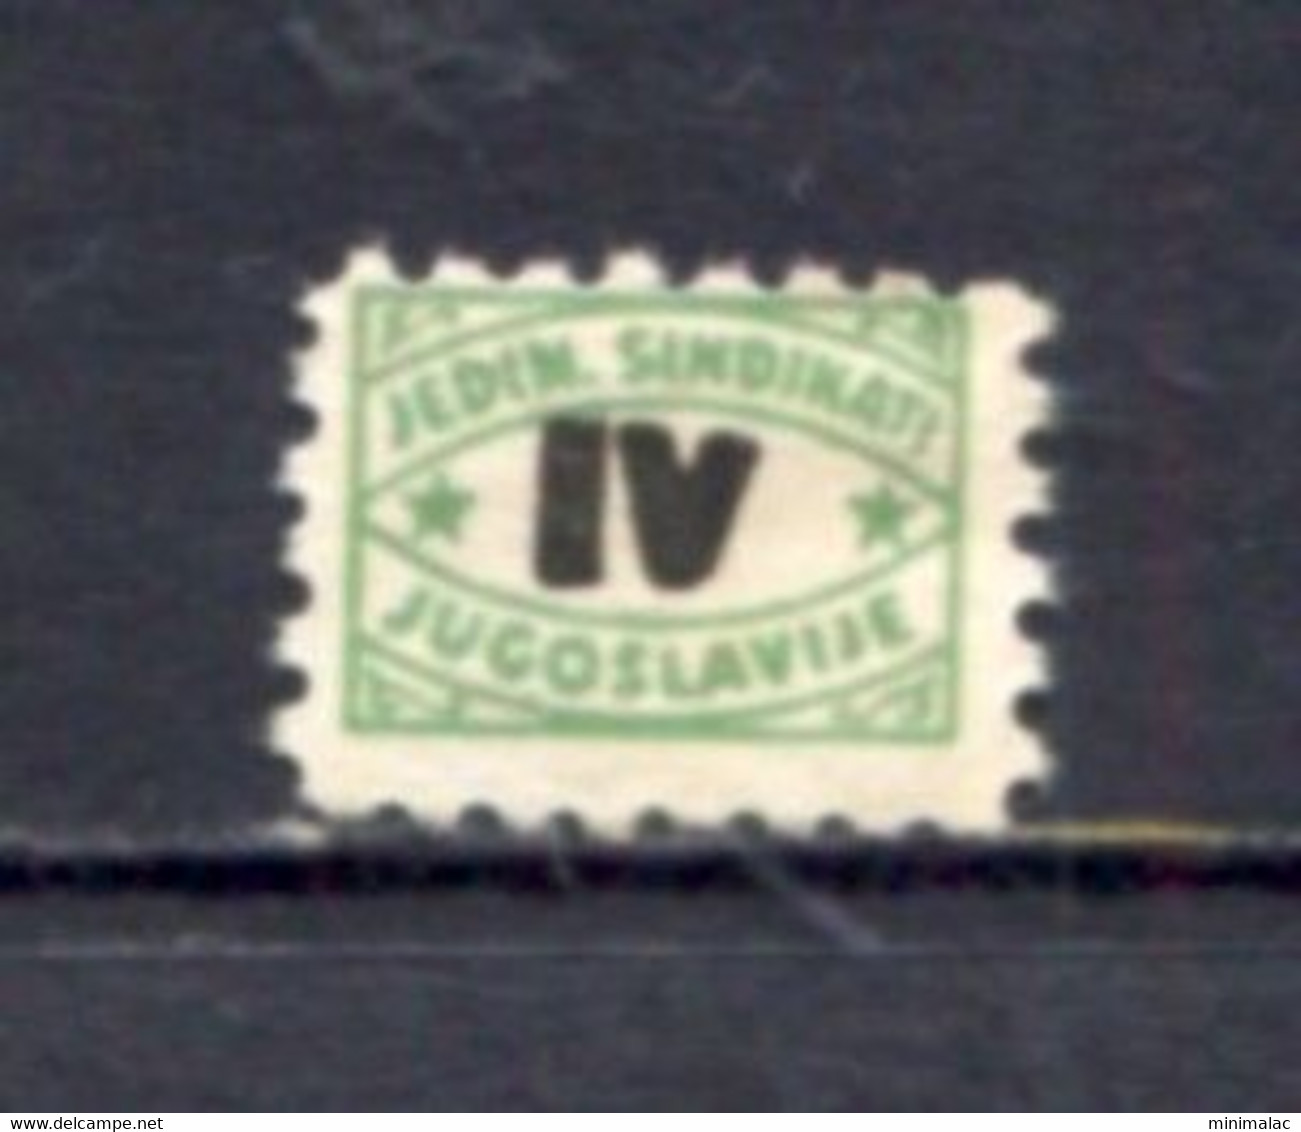 Yugoslavia 1948, Stamp For Membership, Labor Union, Administrative Stamp - Revenue, Tax Stamp, IV , Green, R - Officials